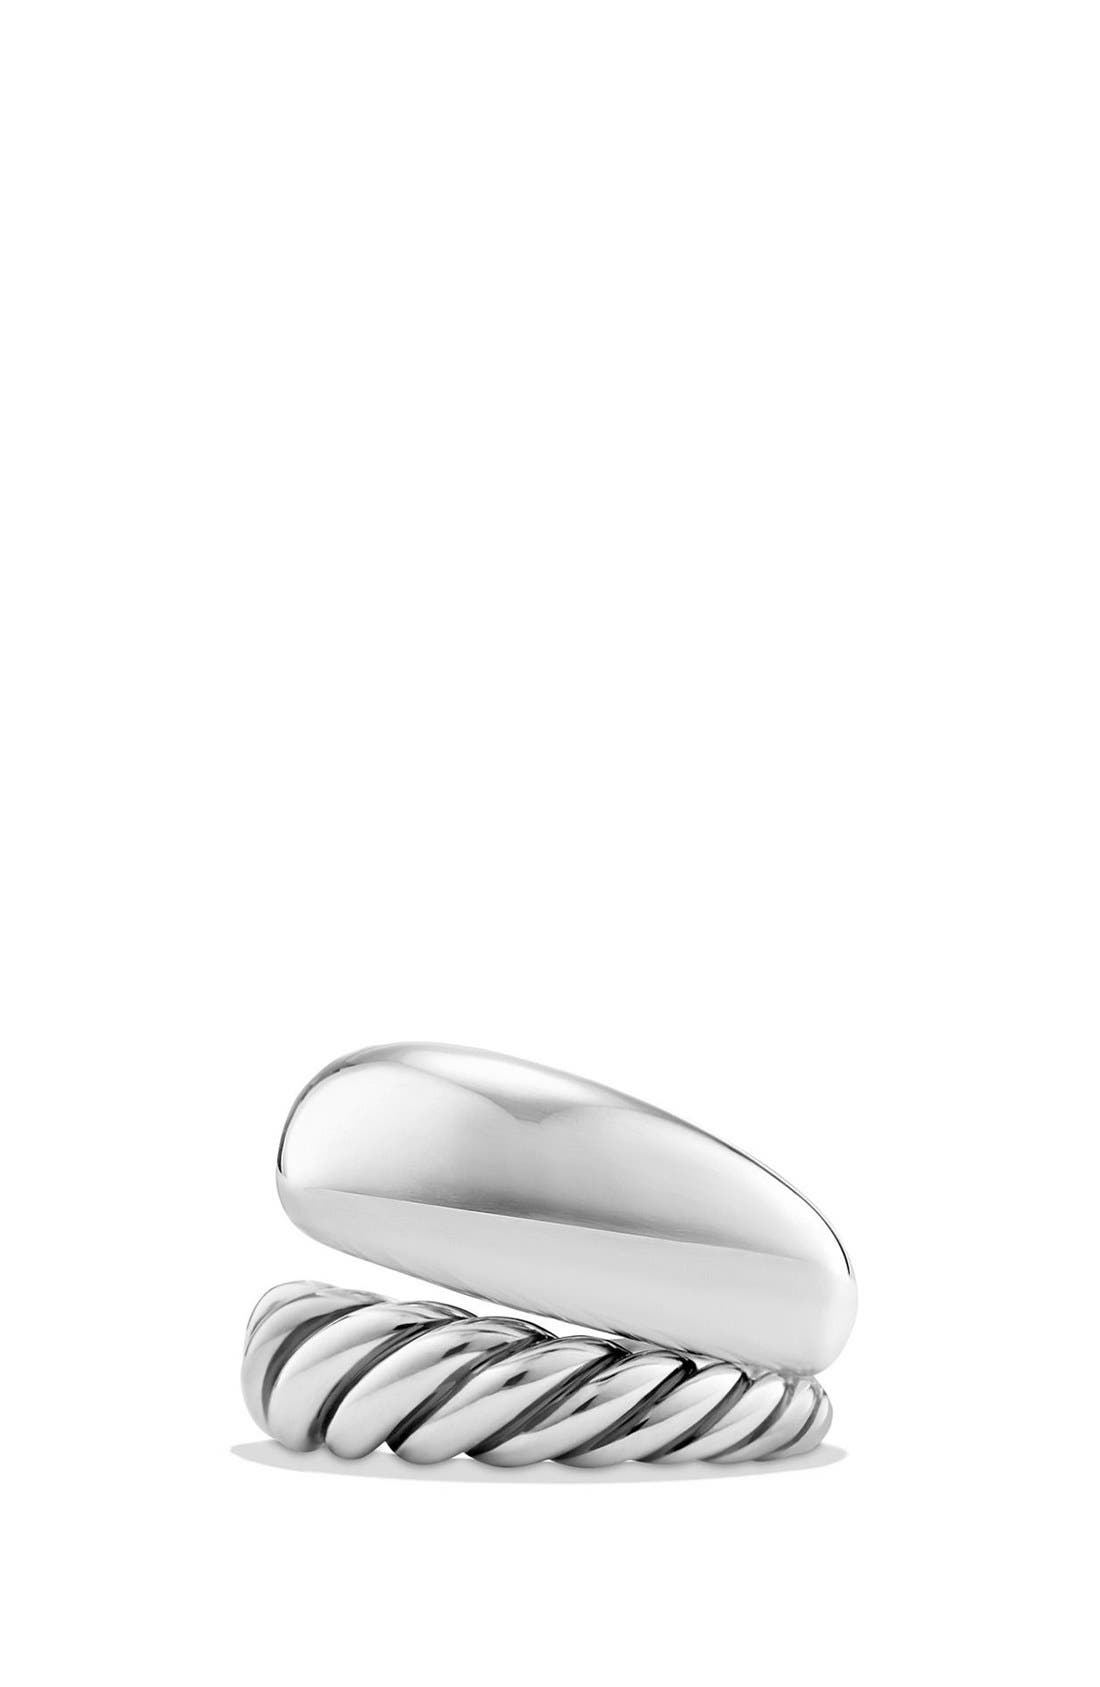 Authentic DAVID YURMAN PURE FORM®  TWO ROW RING Size 9 Ret 17mm-Women's $700